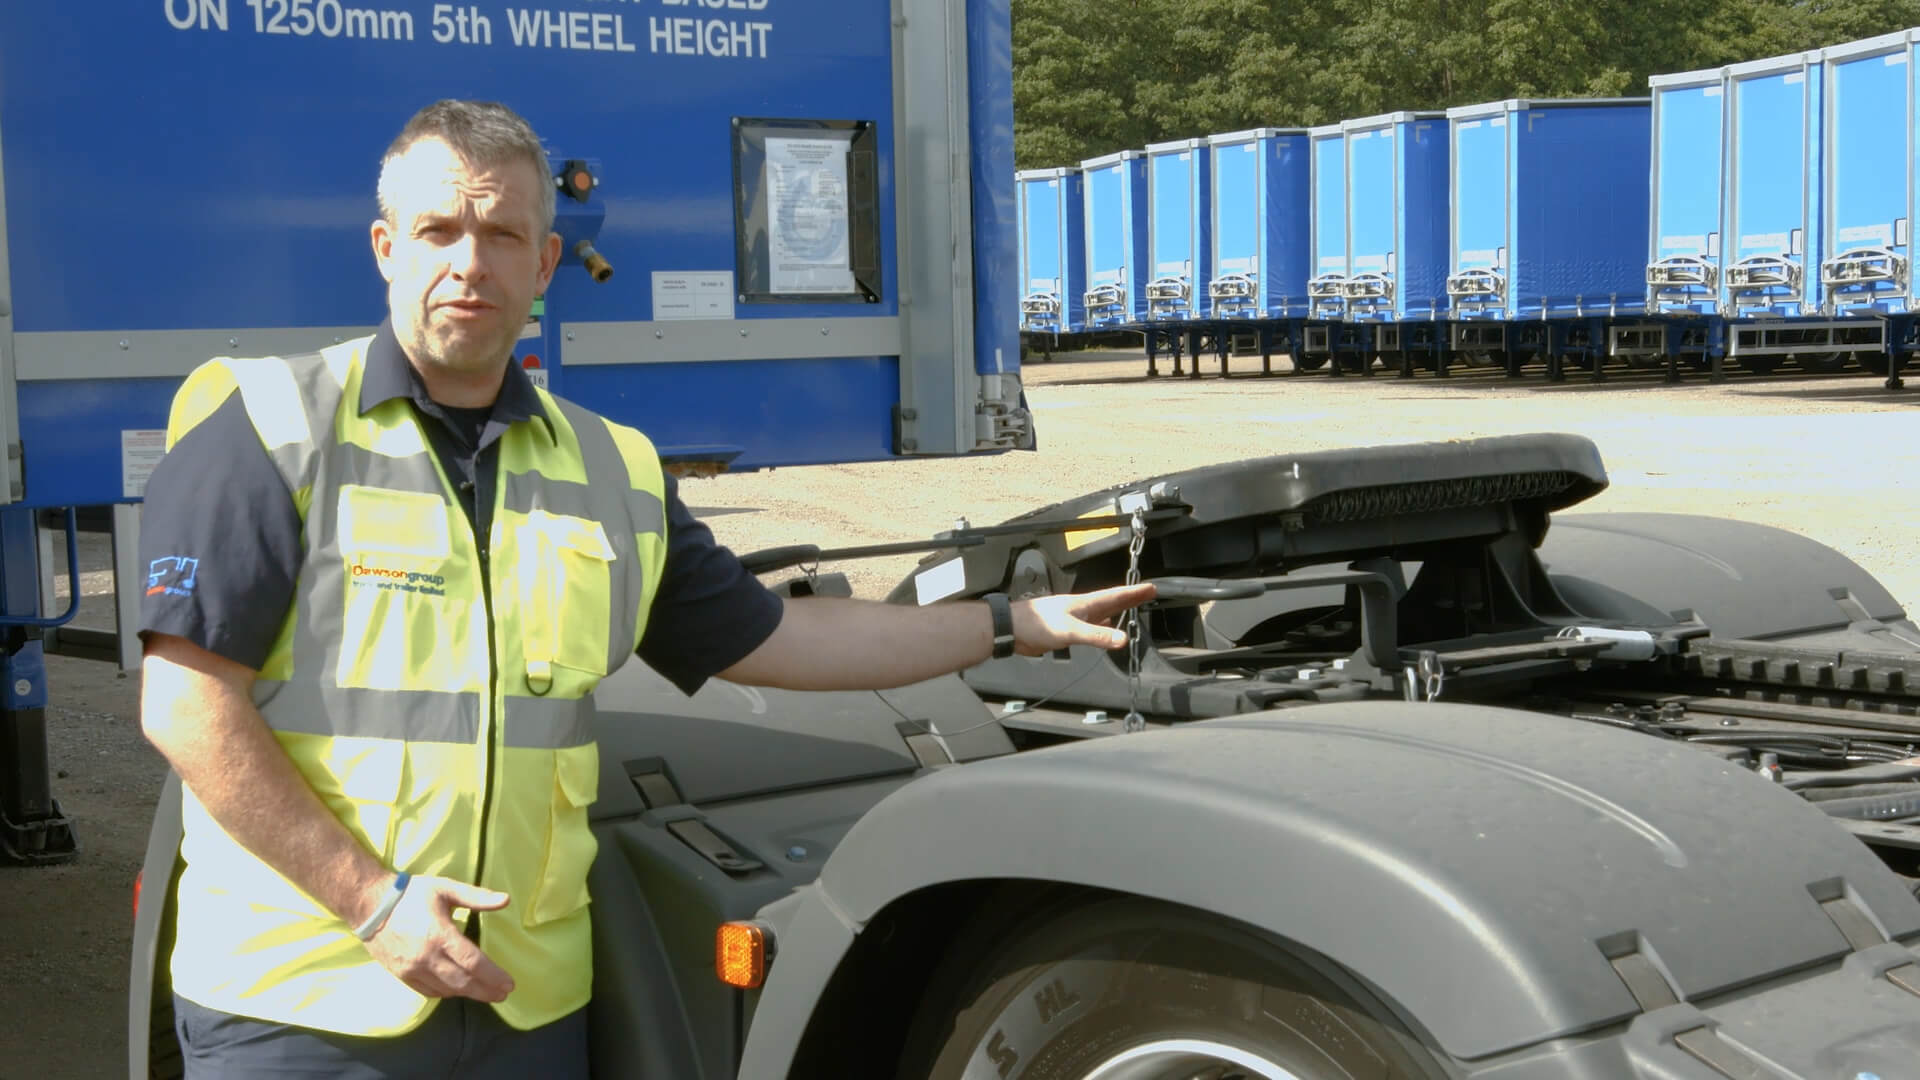 Truck driver in a hi-viz jacket standing next to the back of a tractor unit